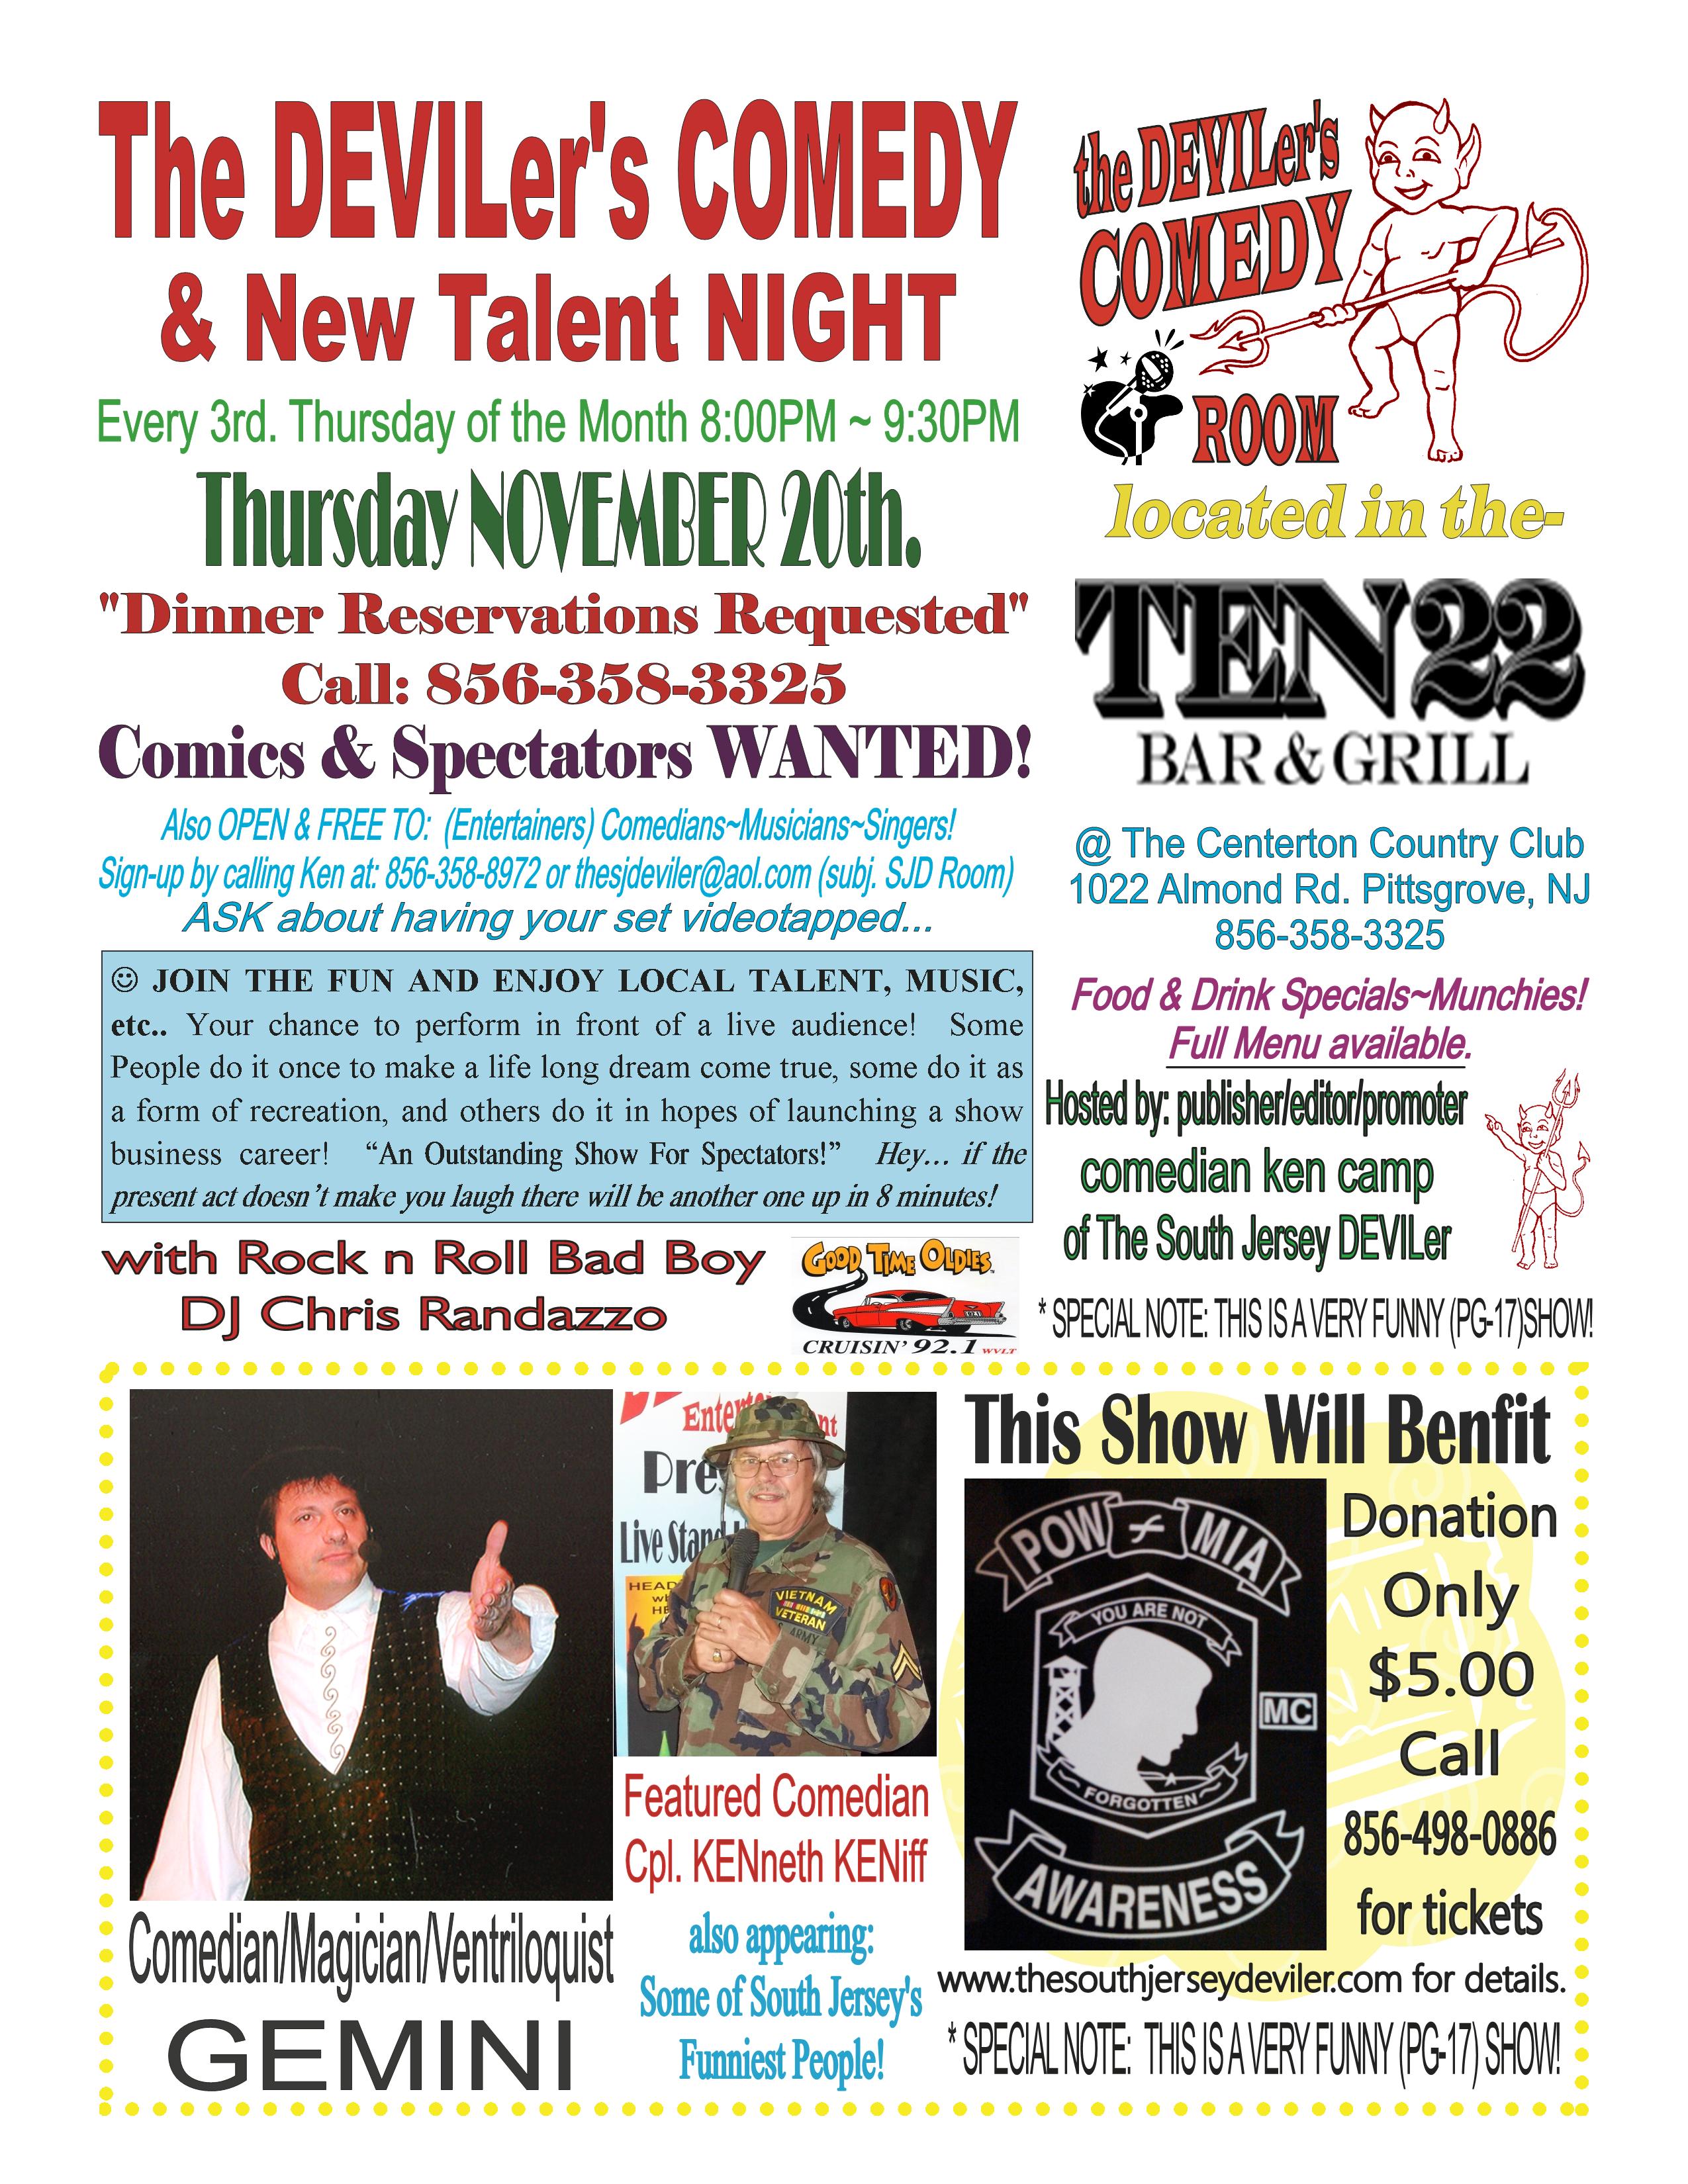 The DEVILer's Comedy & New Talent Night fundraiser for POW~MIA AWARENESS